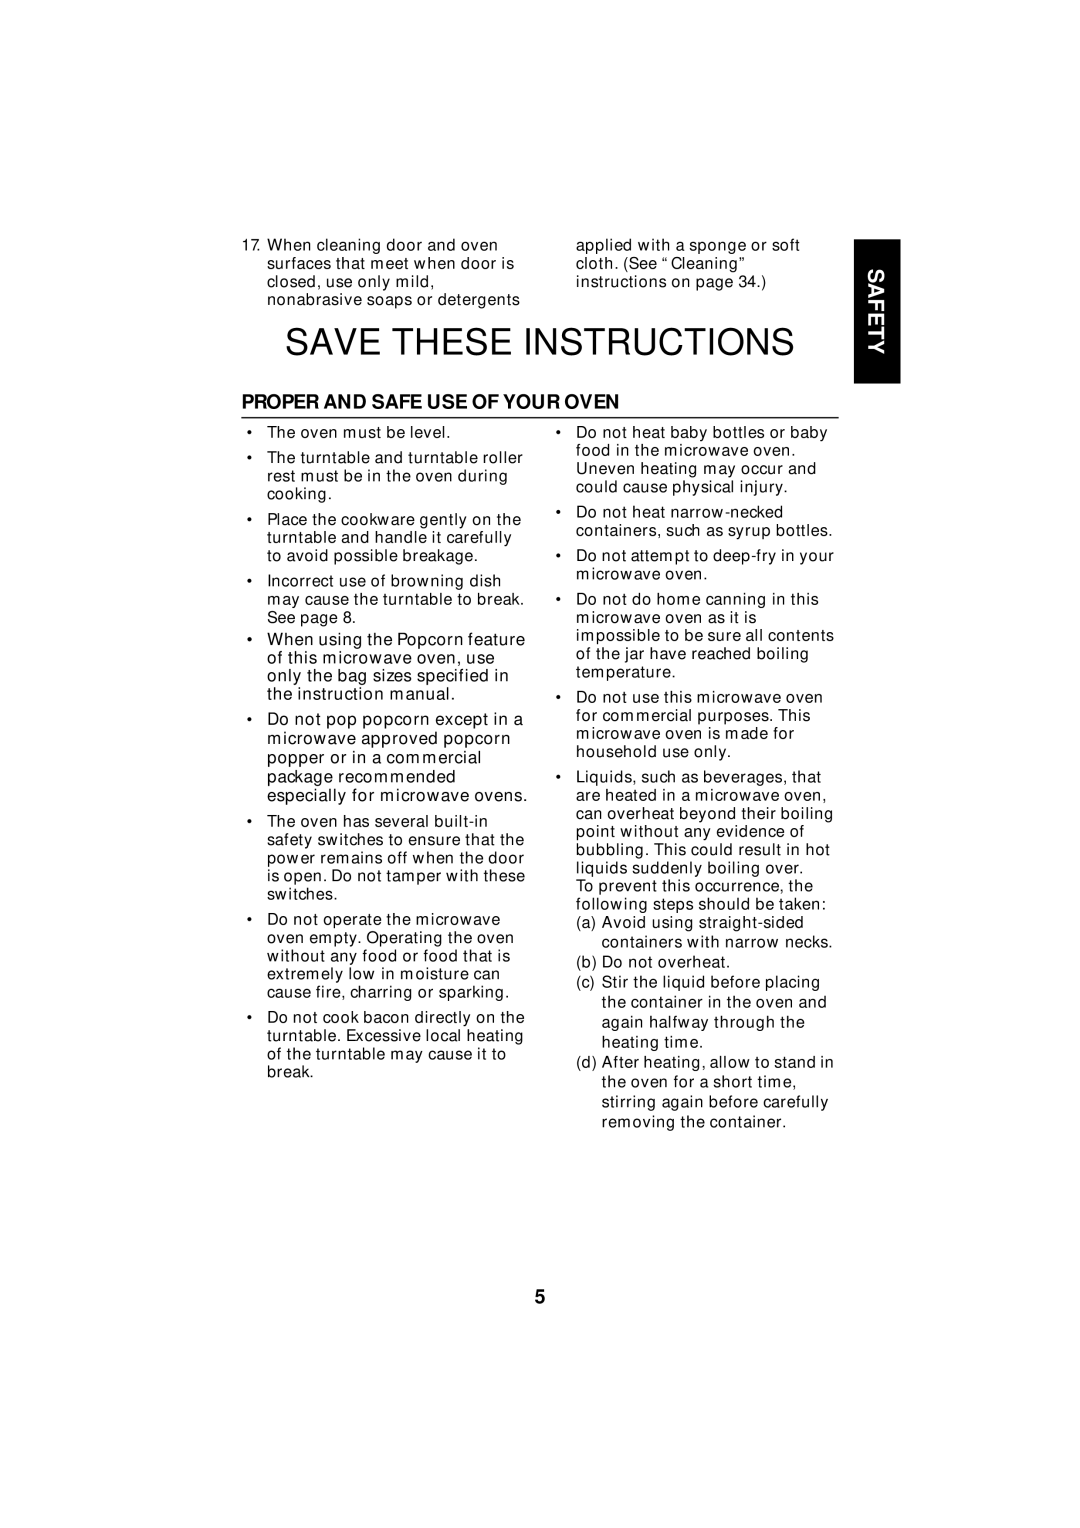 Maytag UMC5100AD, Microwave Oven manual Safety, Proper And Safe Use Of Your Oven, Save These Instructions 